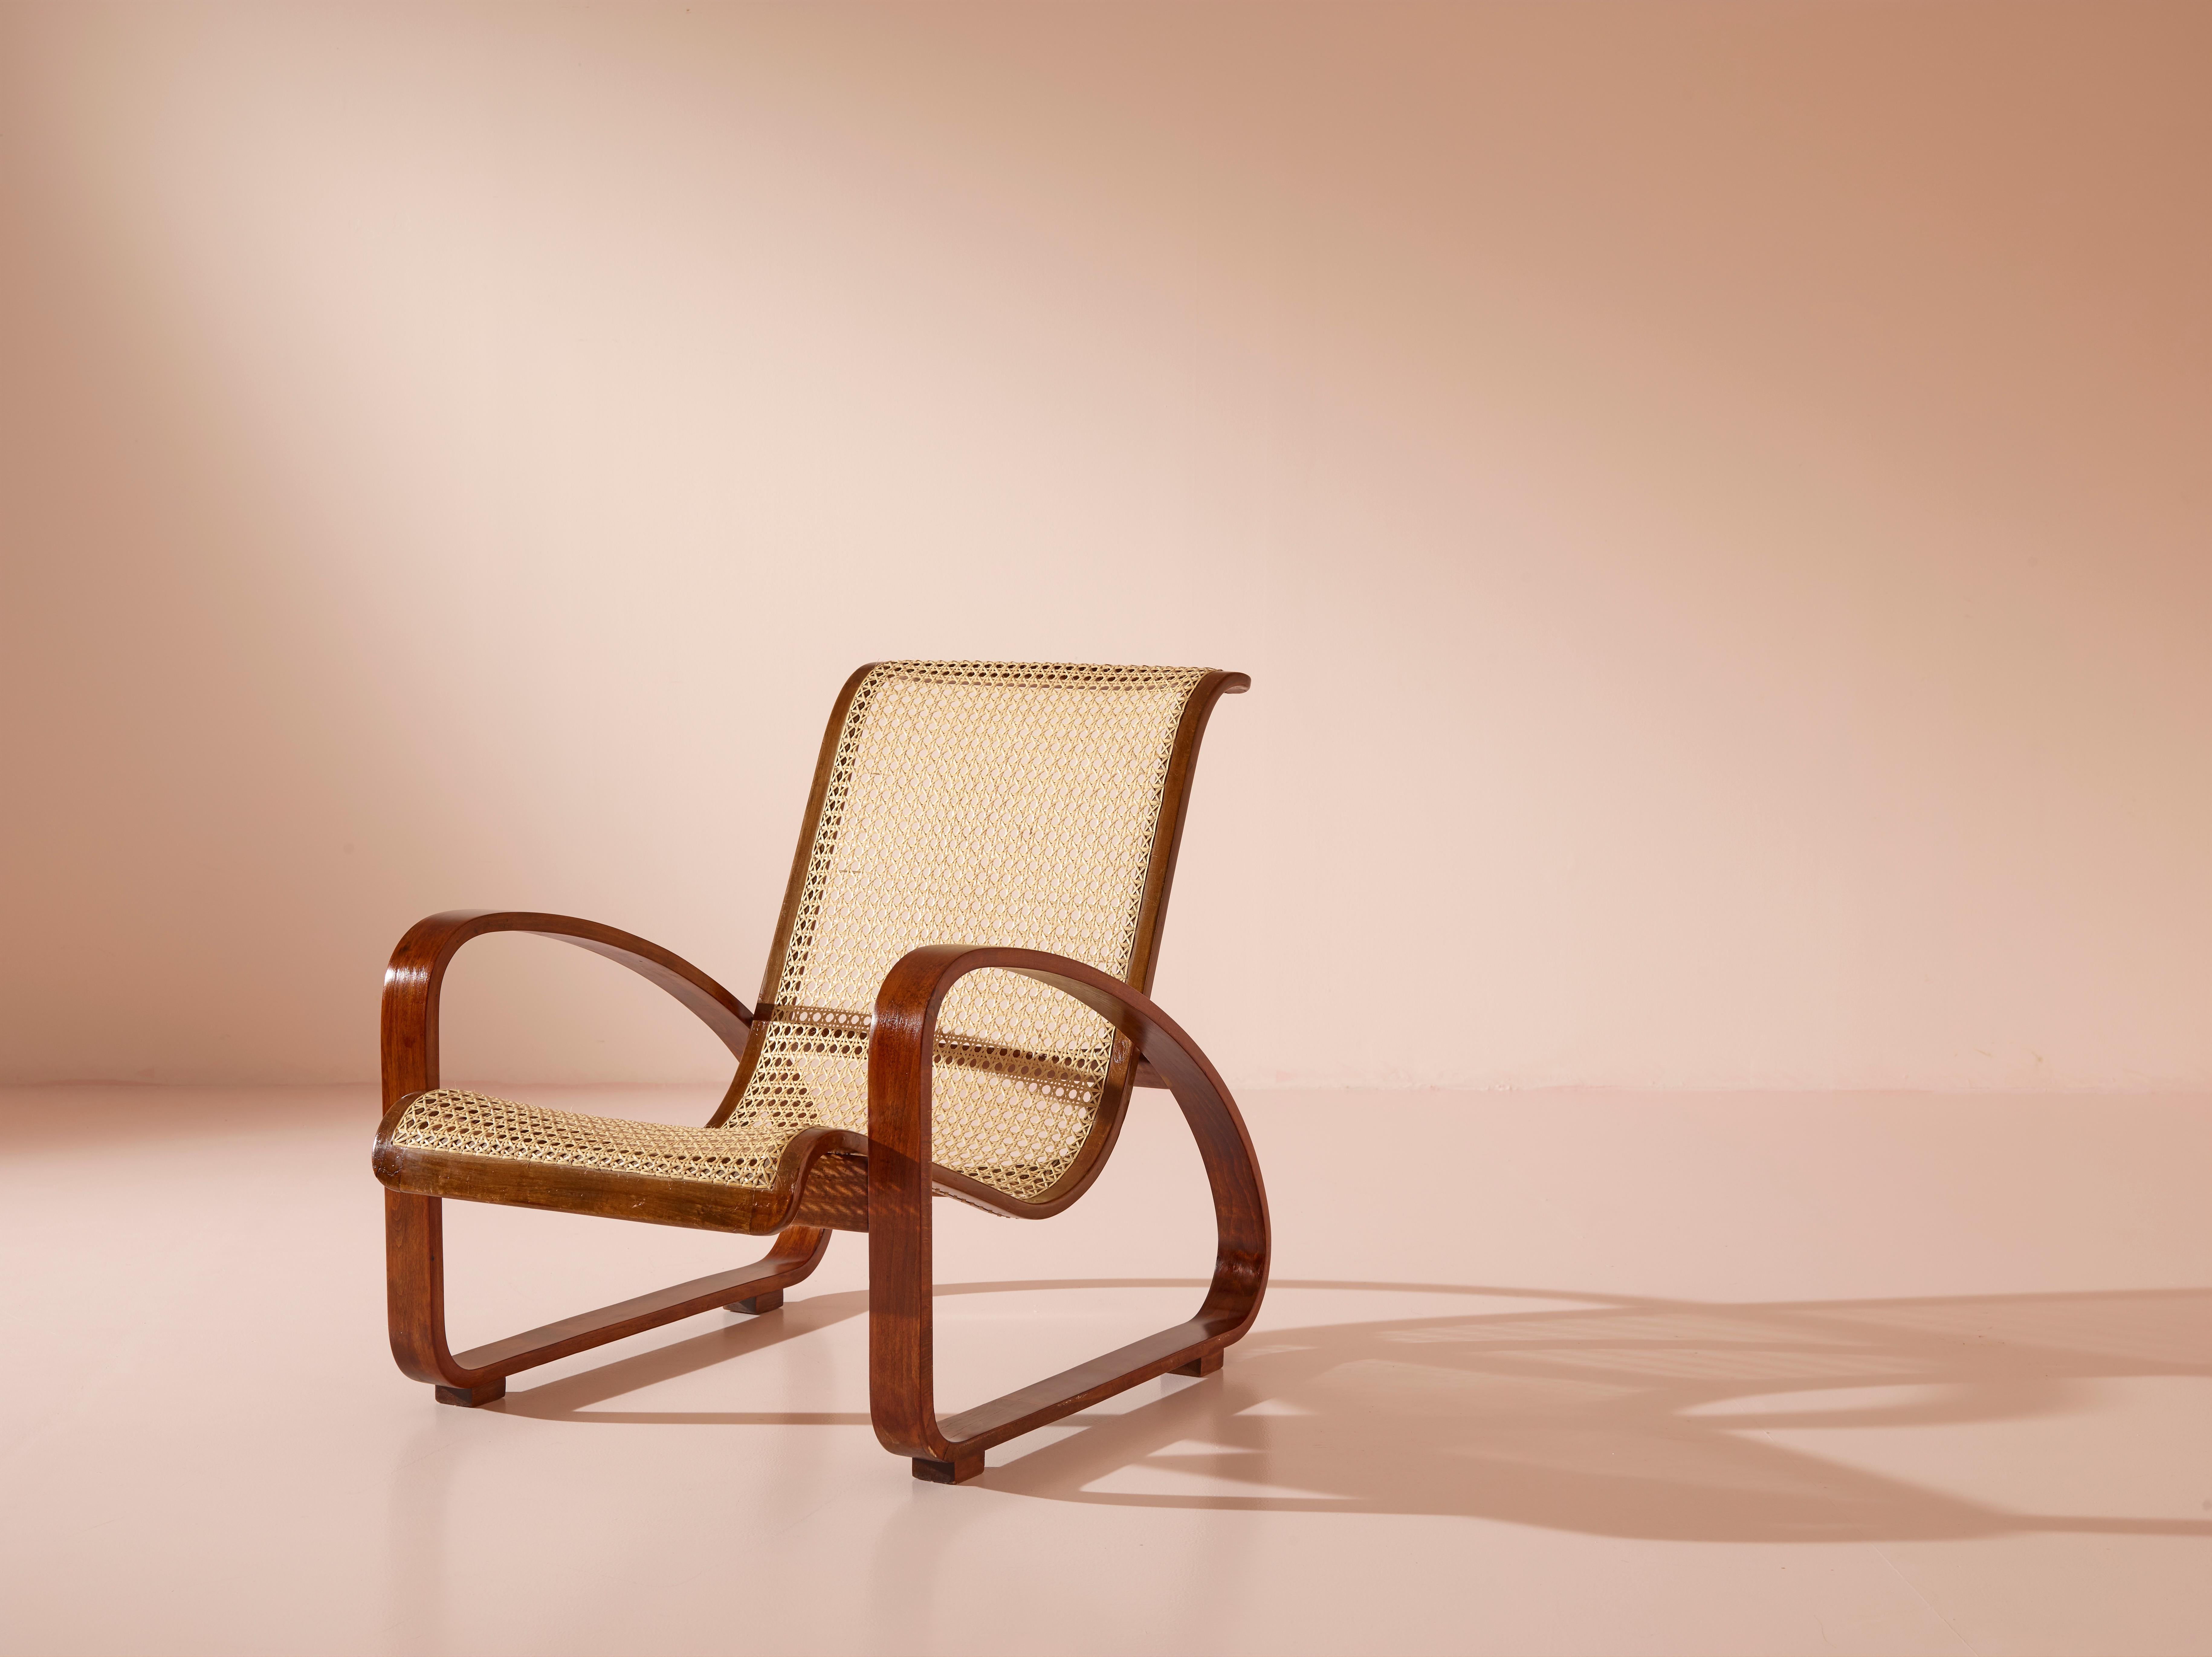 A rare armchair from the 1930s manufactured by Ditta Porino in Torino, Italy. Crafted during the interwar period, its clean and simple lines are a testament to the designer's ingenuity, featuring a stunning combination of curved beechwood for the